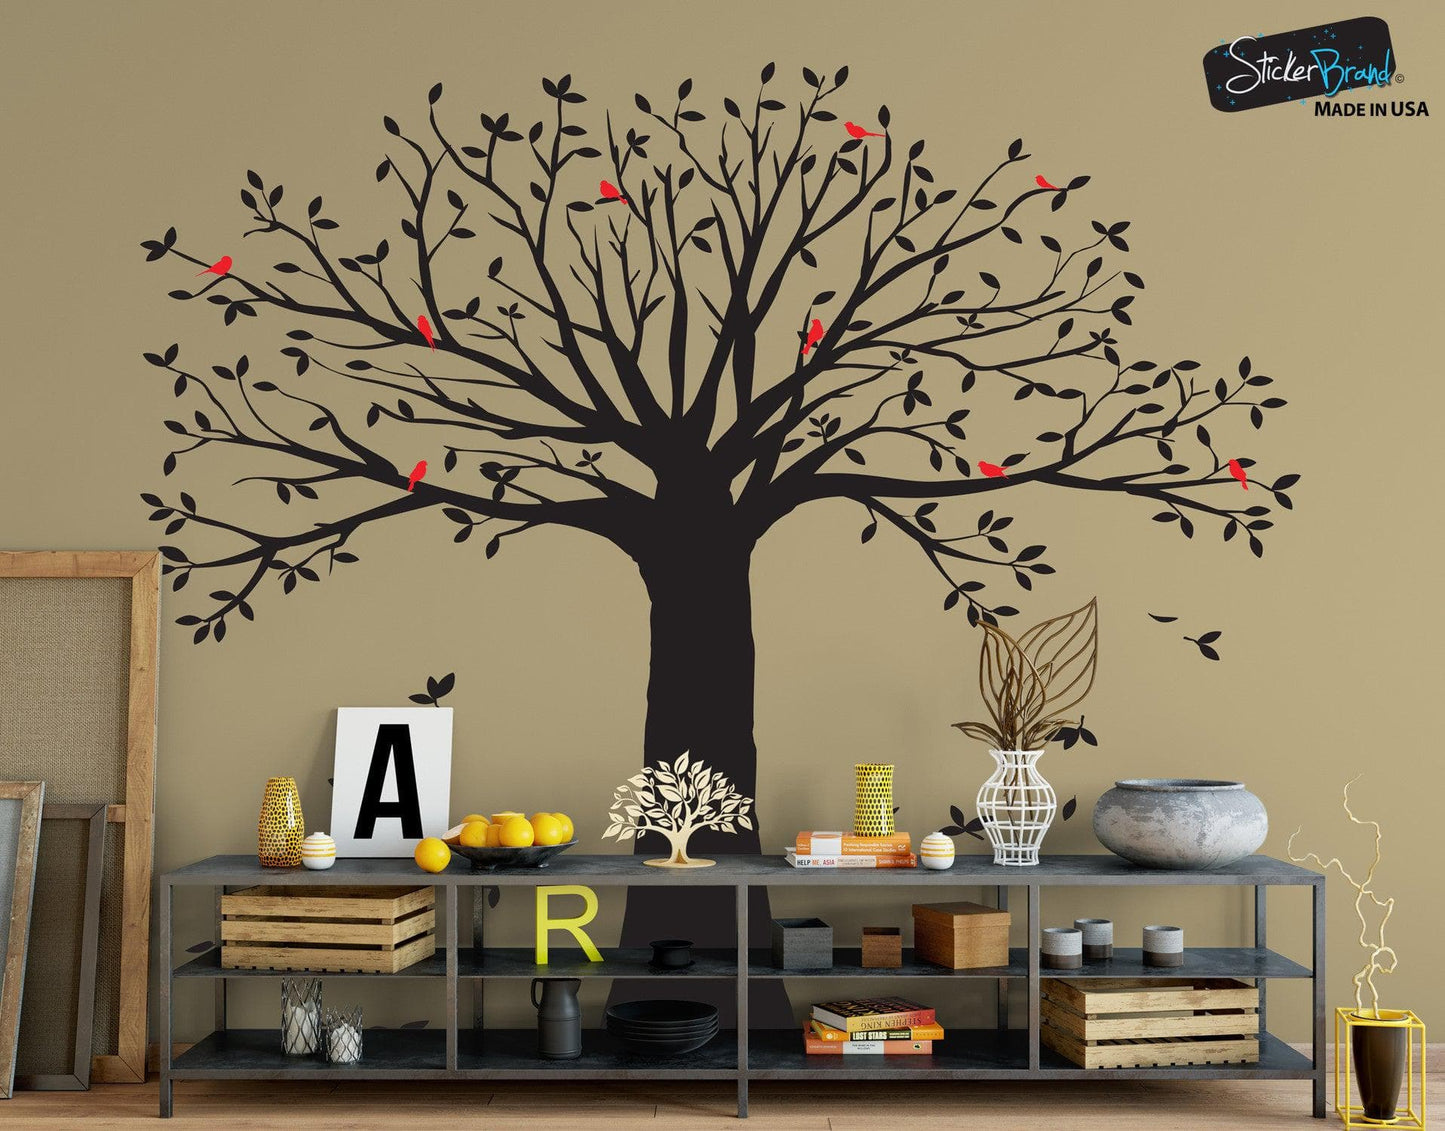 Family Tree with Birds Wall Decal Sticker #6087